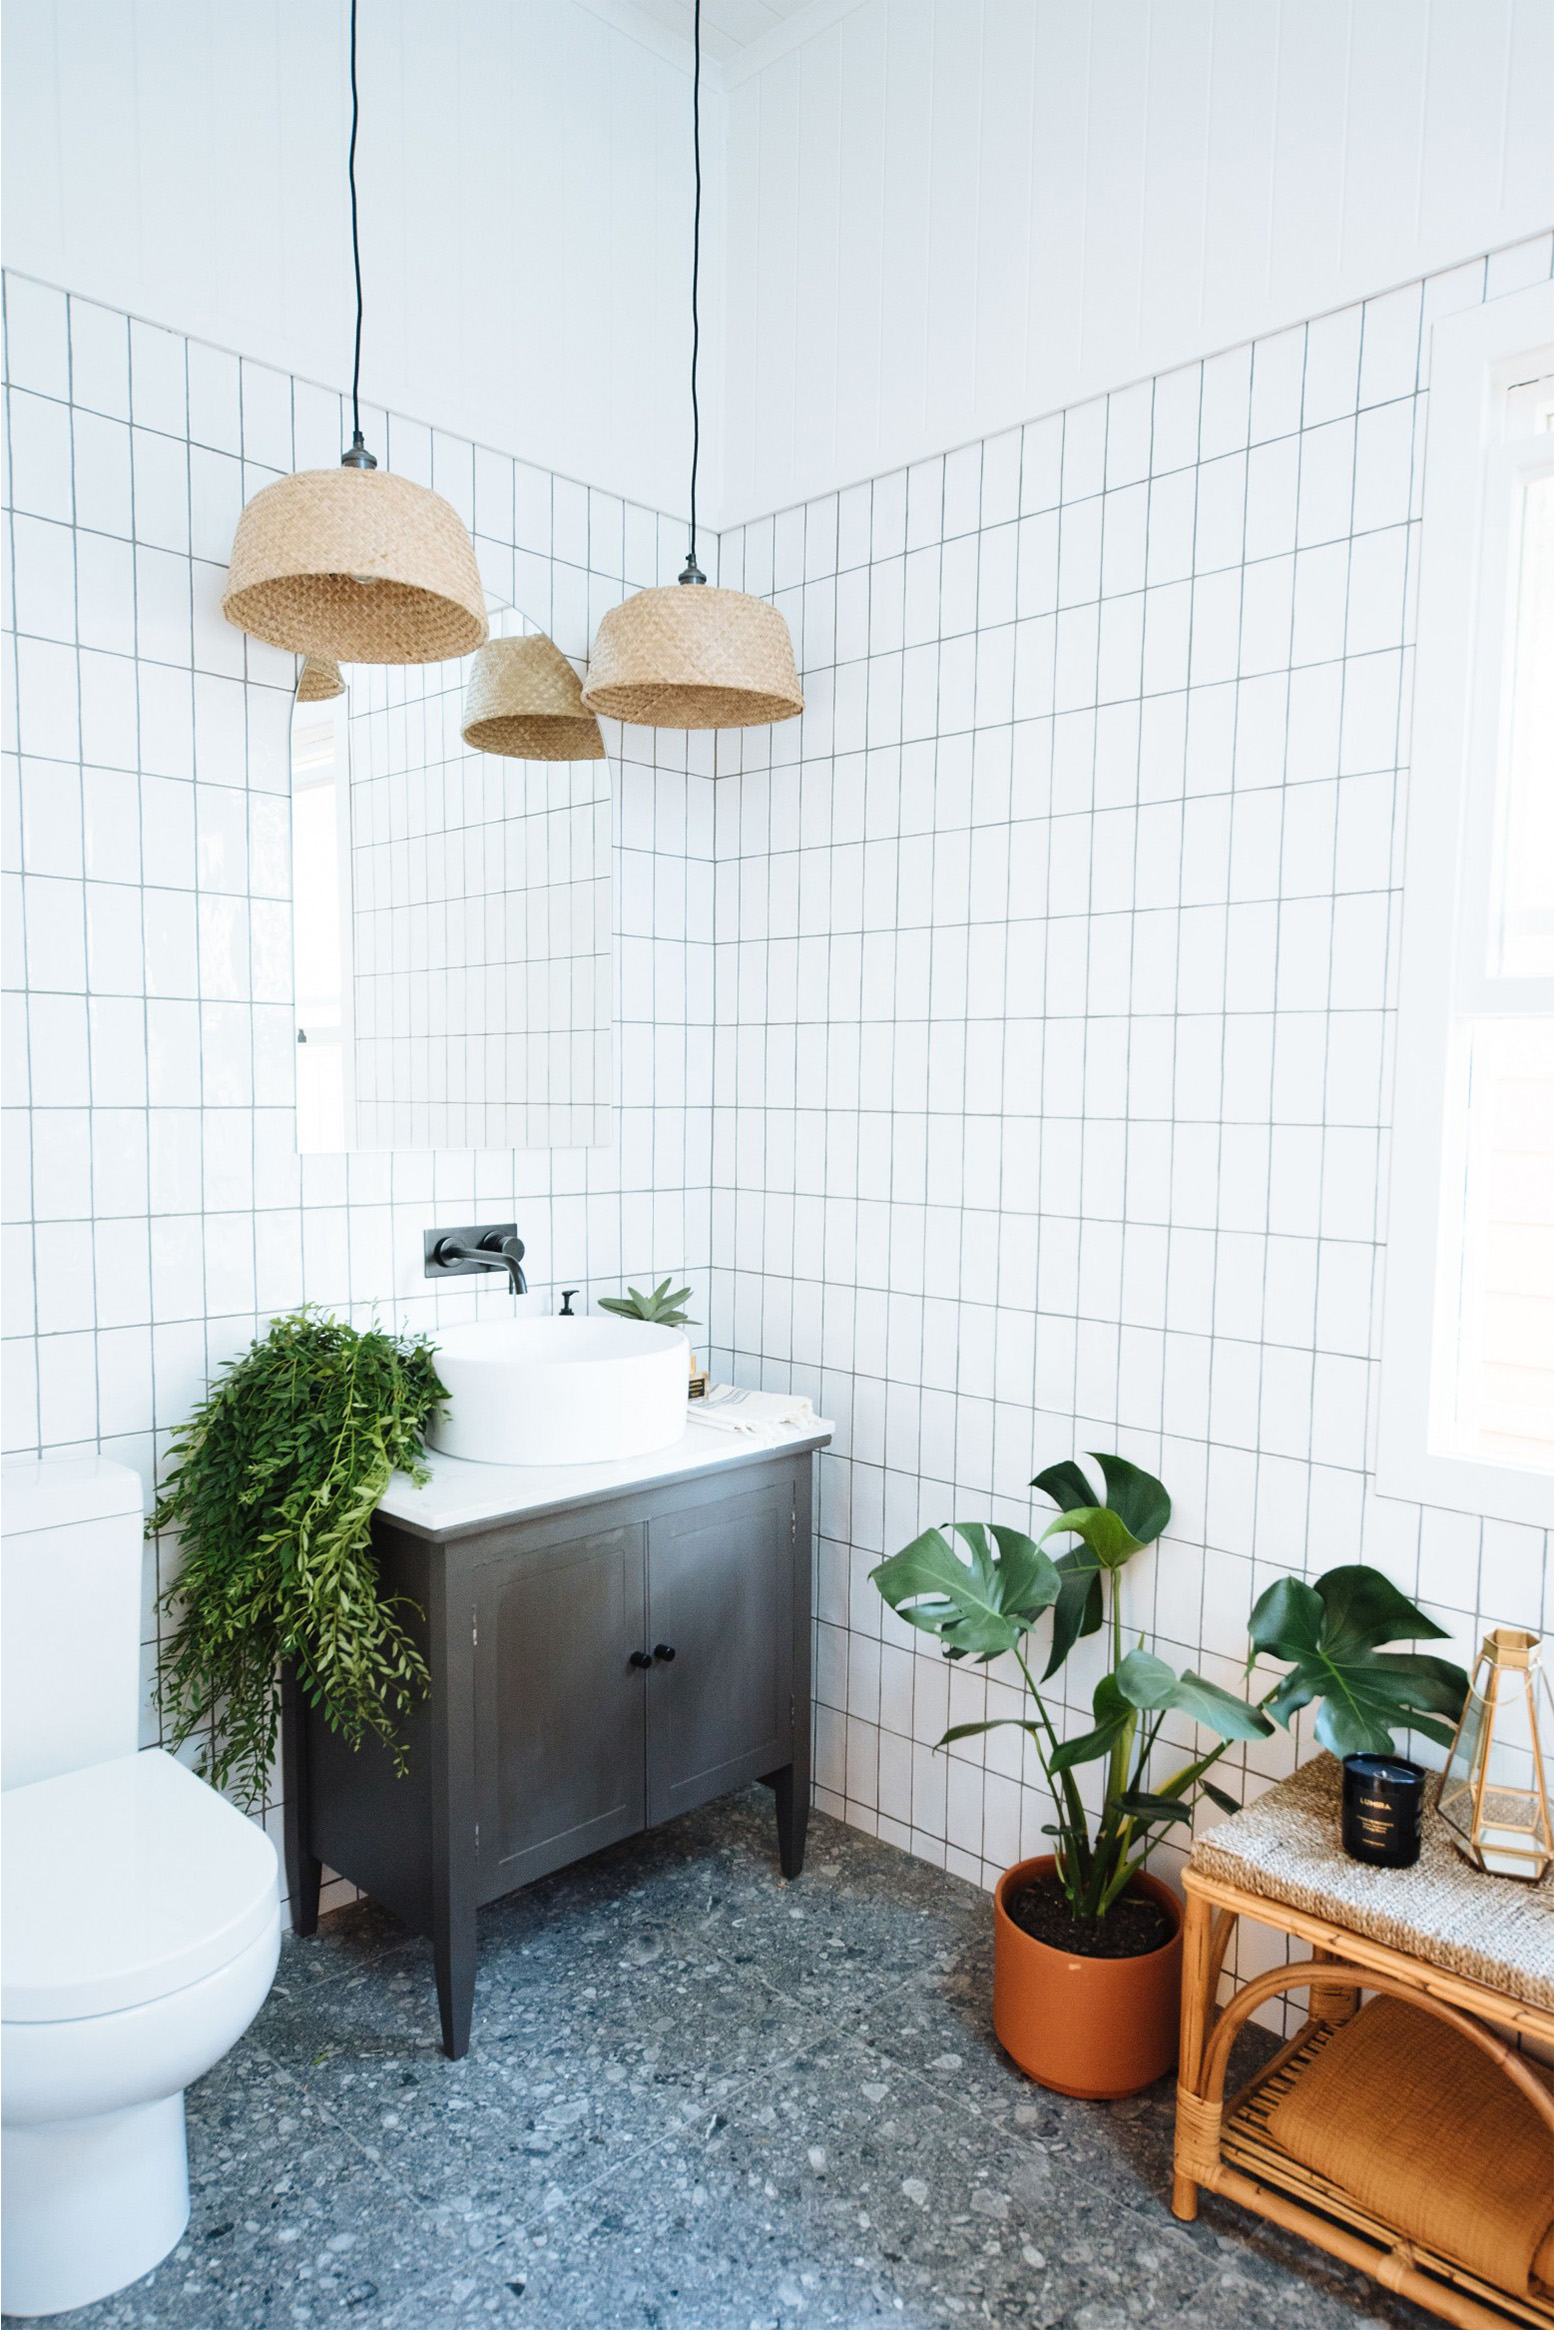 Renovation Reveal: The Bathrooms!